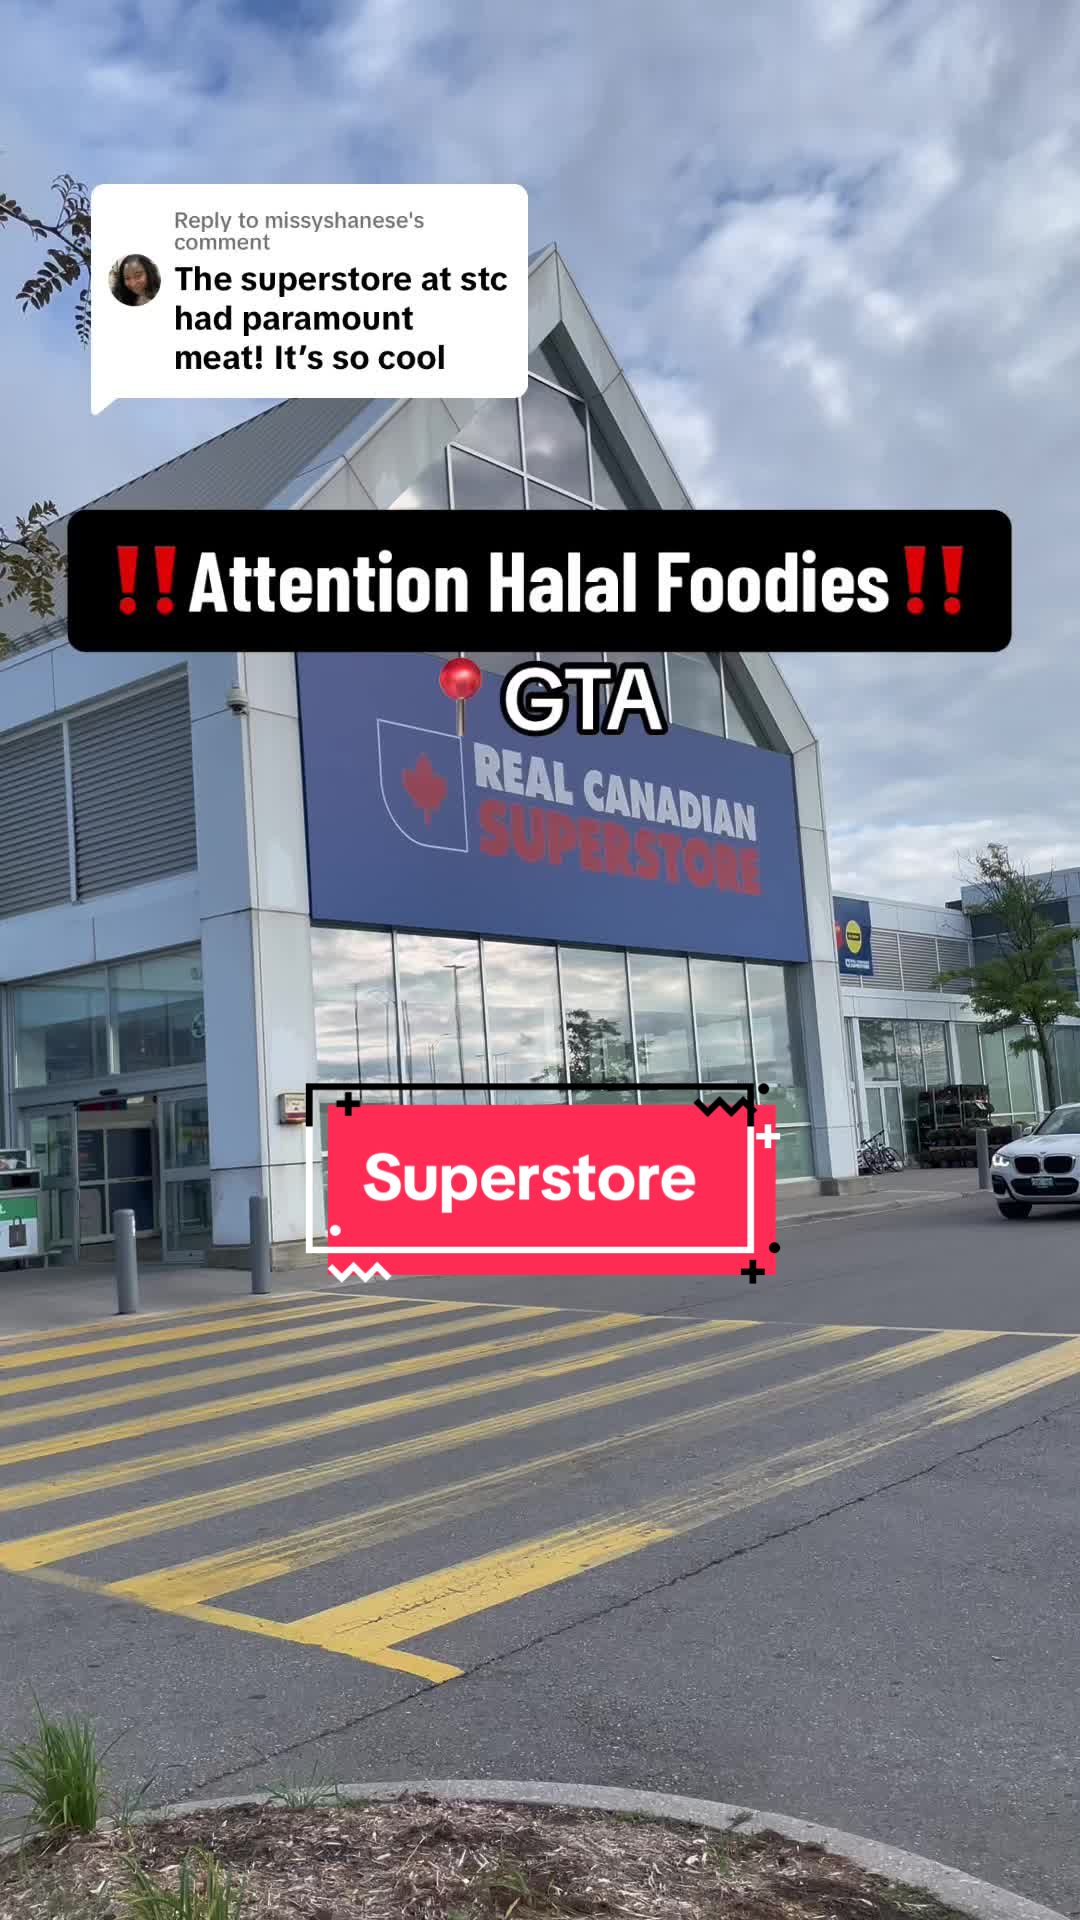 CapCut_real canadian superstore